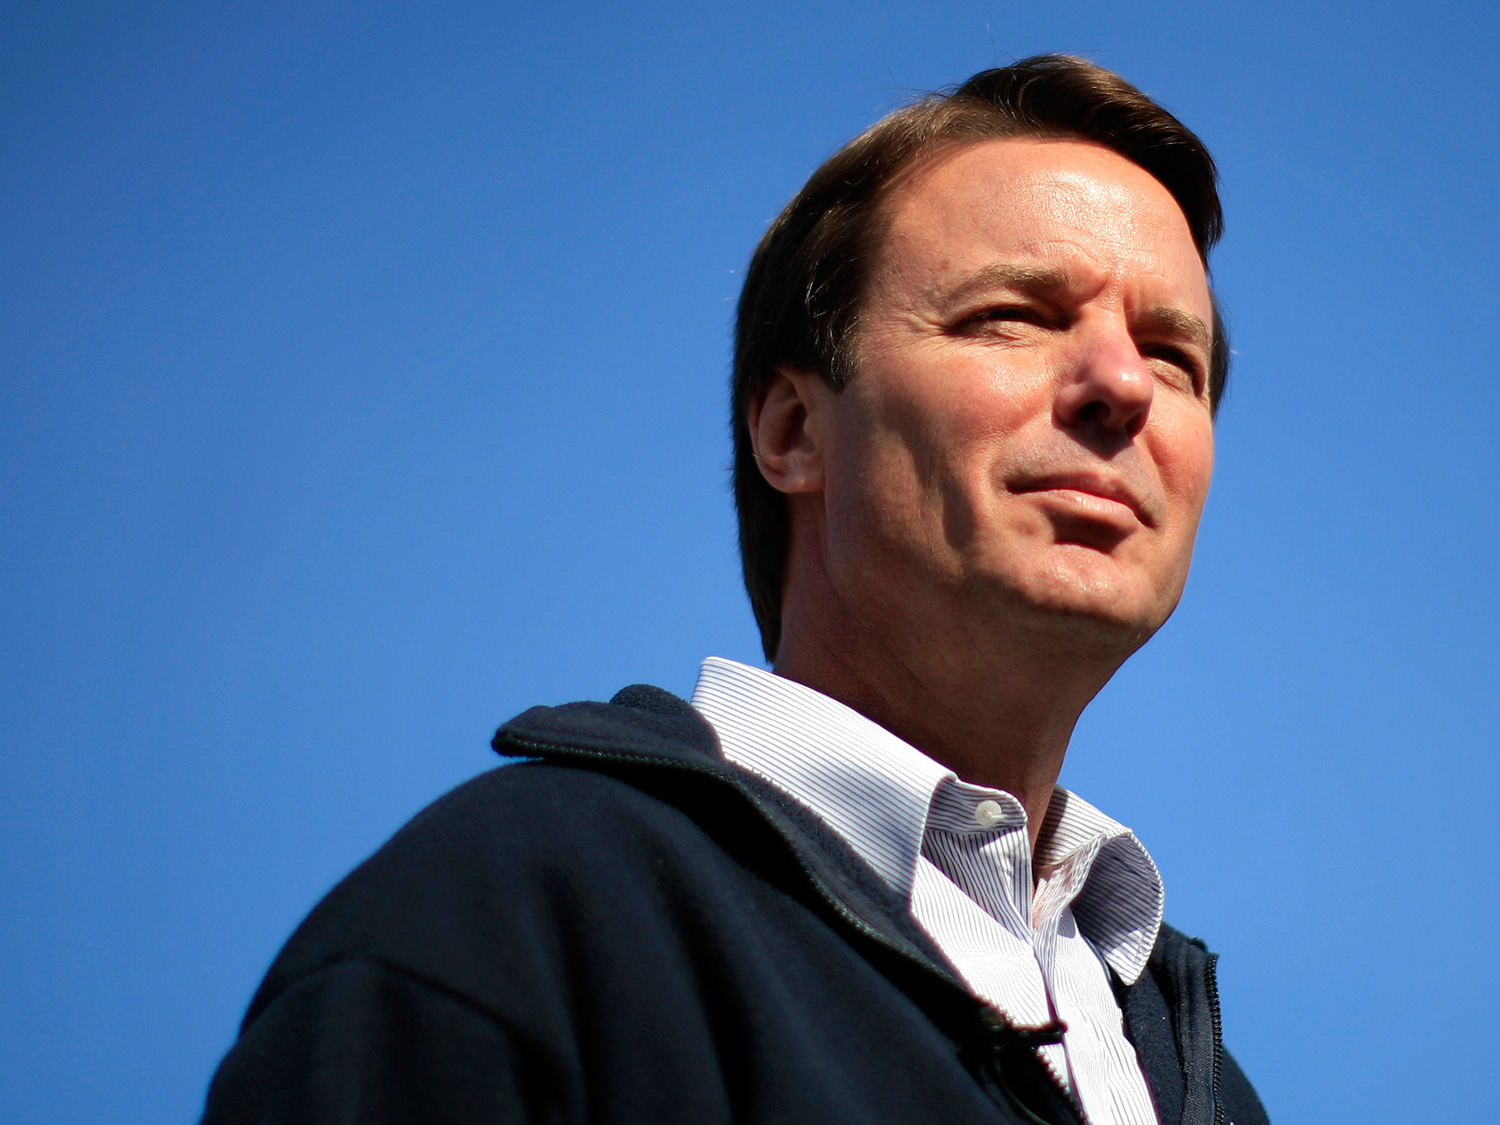 John Edwards to be indicted this week? CBS News